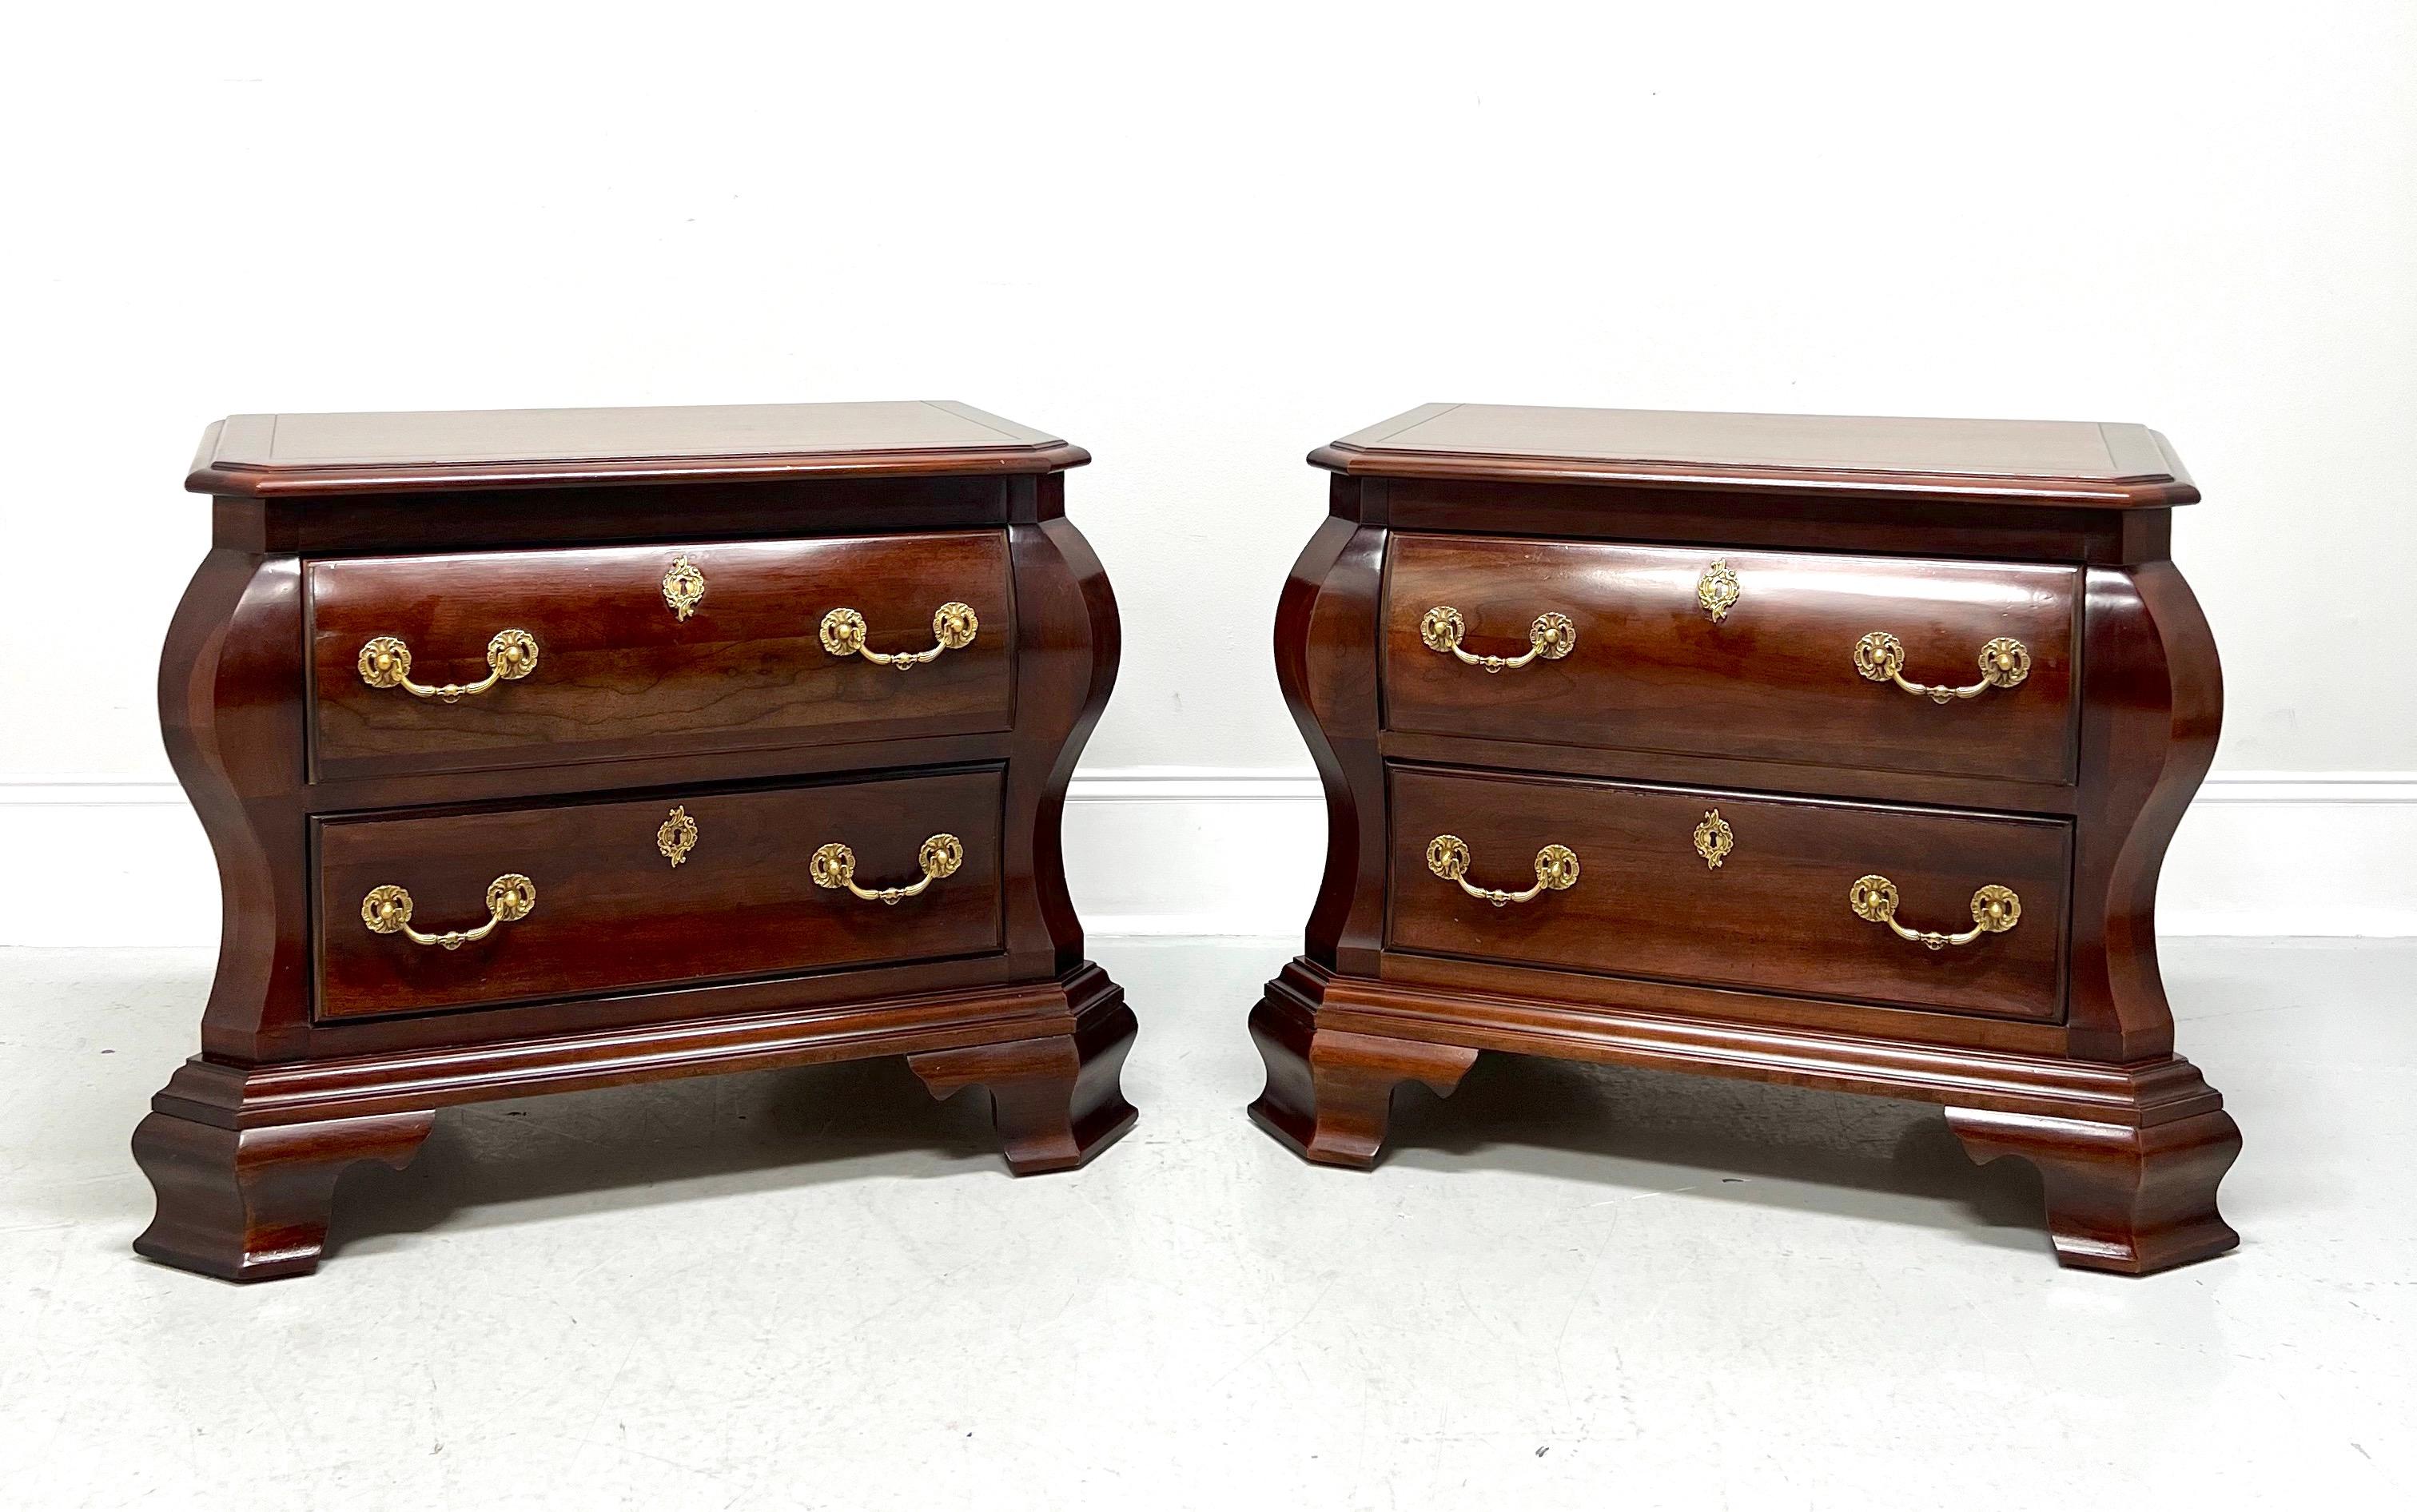 A pair of Italian Provincial style nightstands by Century Furniture, from their Cardella Collection. Cherry wood with decorative brass hardware, bombe shaped, banded top with bevel edge & clipped corners, and ogee bracket feet. Features two drawers